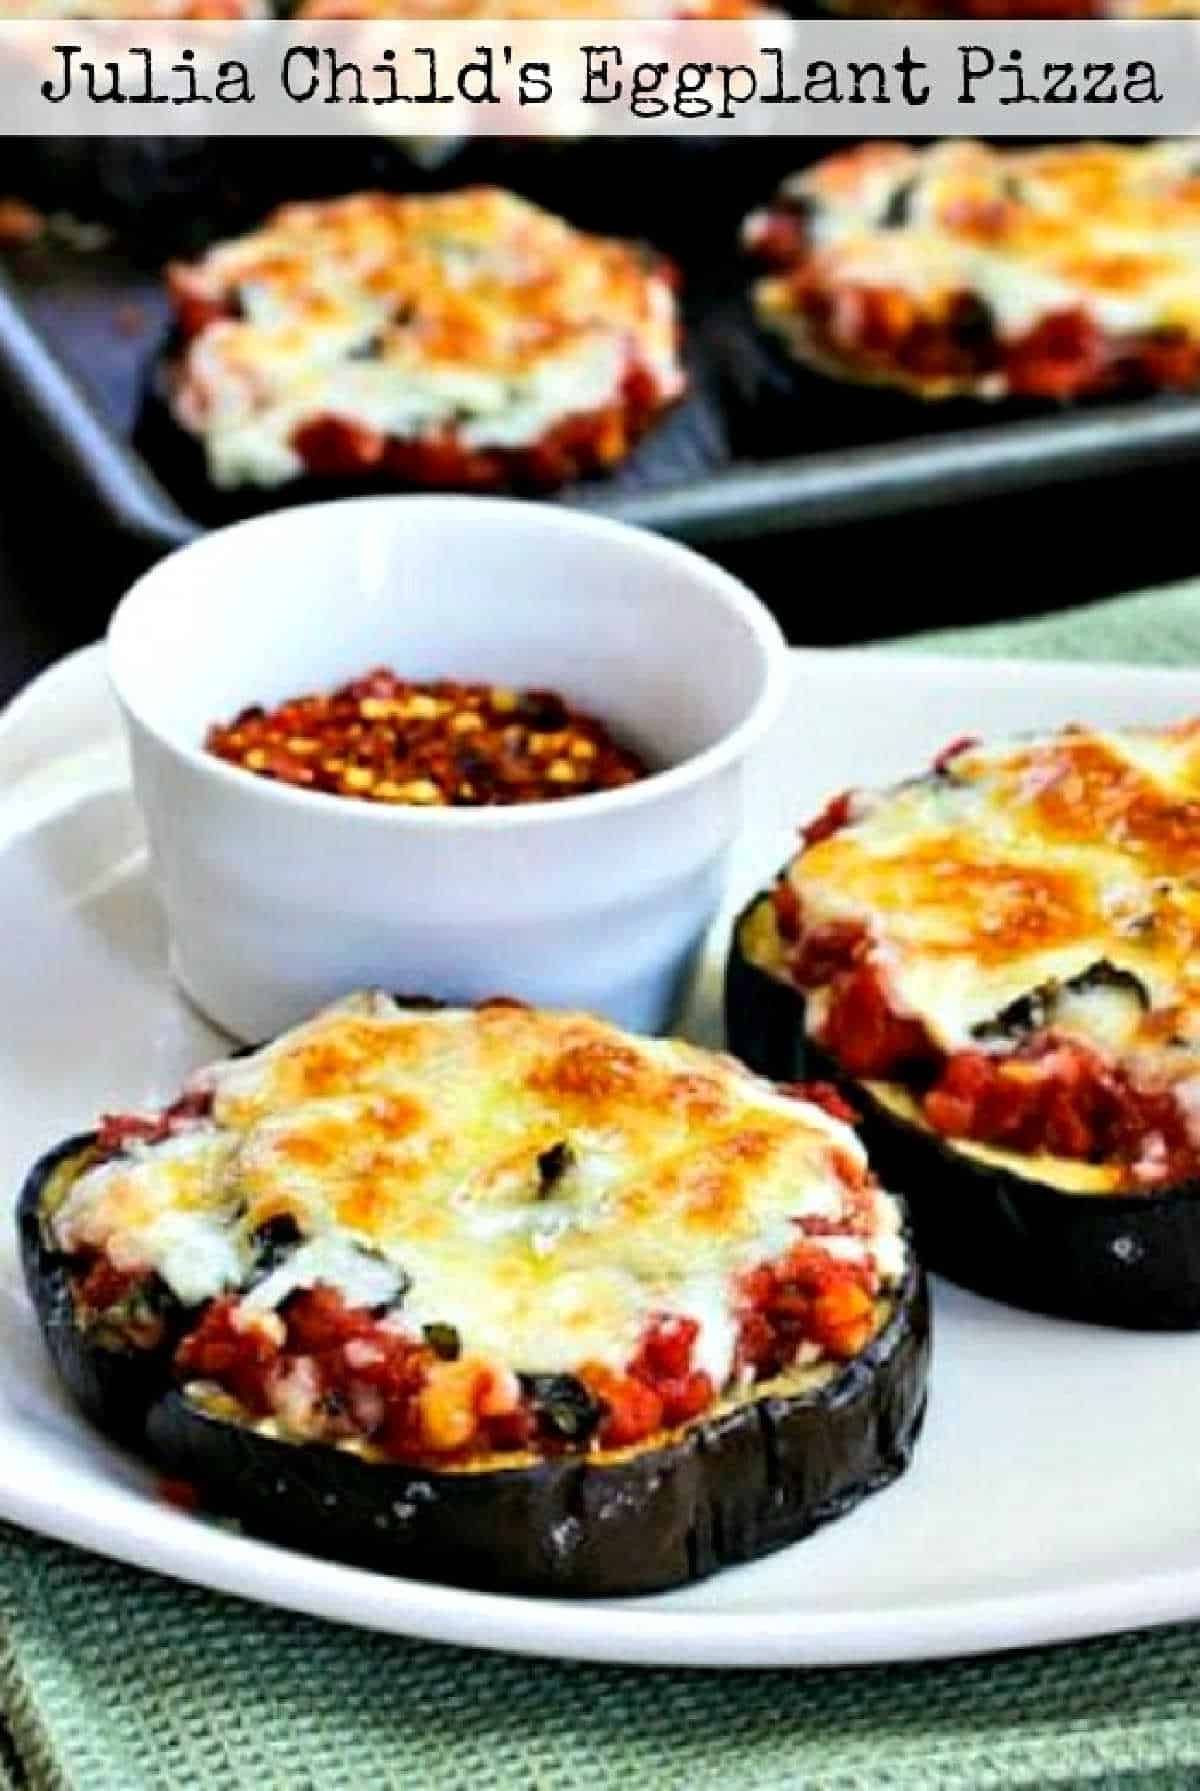 Julia Child's Eggplant Pizza shown on a plate with roasting pan in background